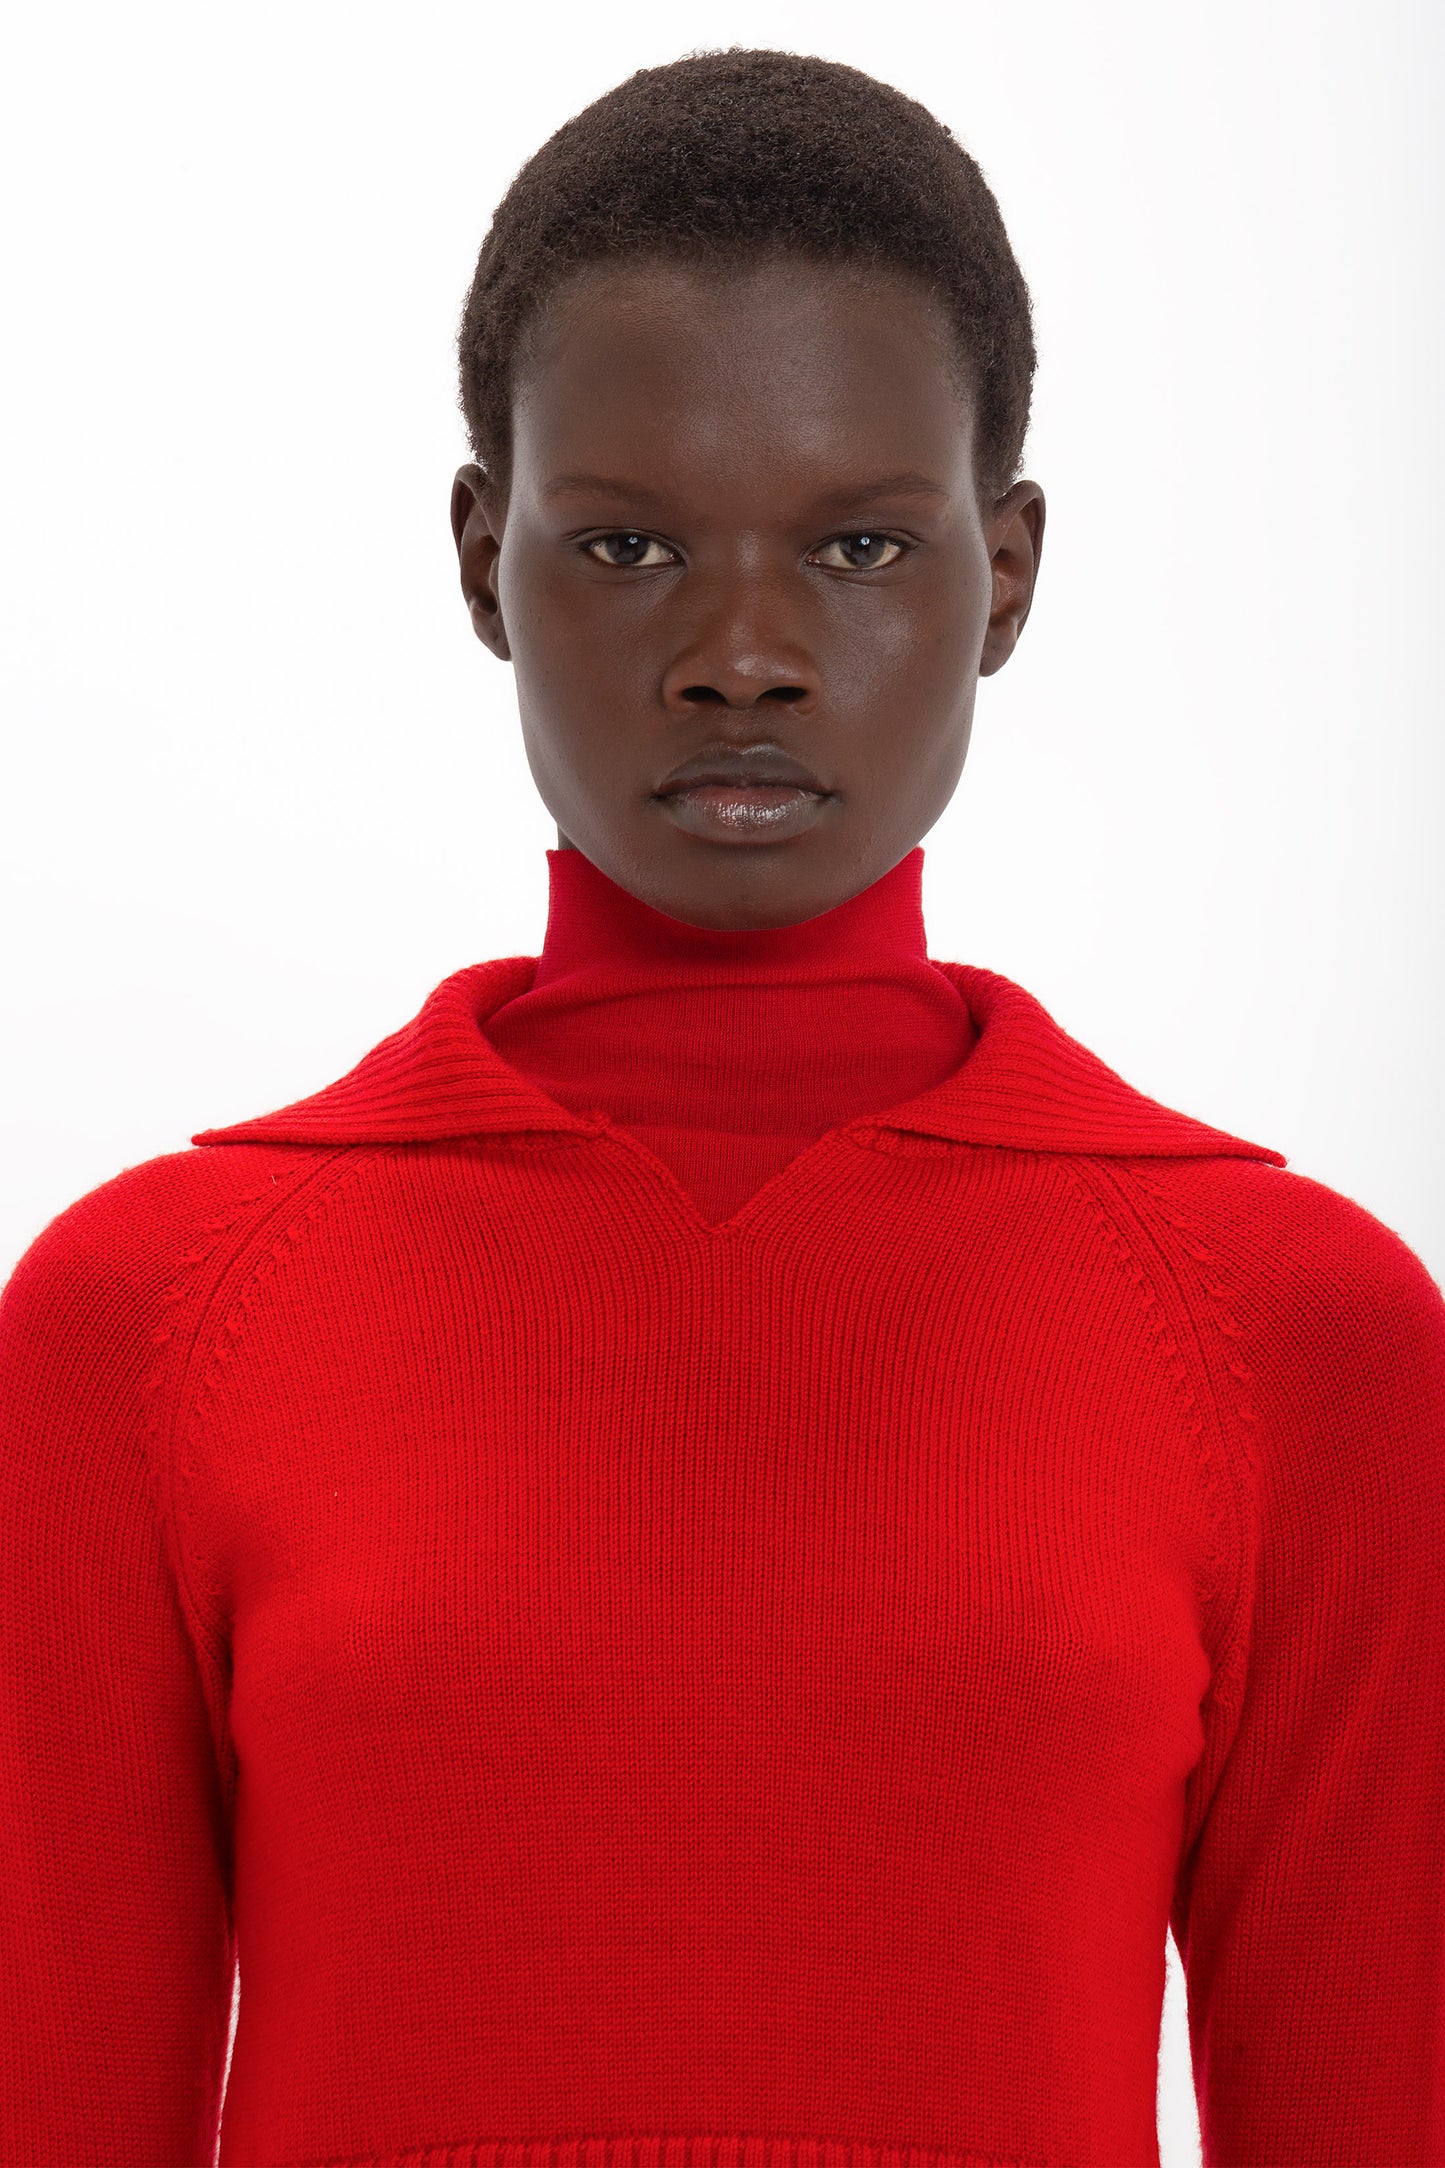 A person is wearing a vibrant red Double Layer Top In Deep Red crafted from soft merino wool, channeling a Victoria Beckham vibe. They have short hair and are looking directly at the camera against a plain white background.